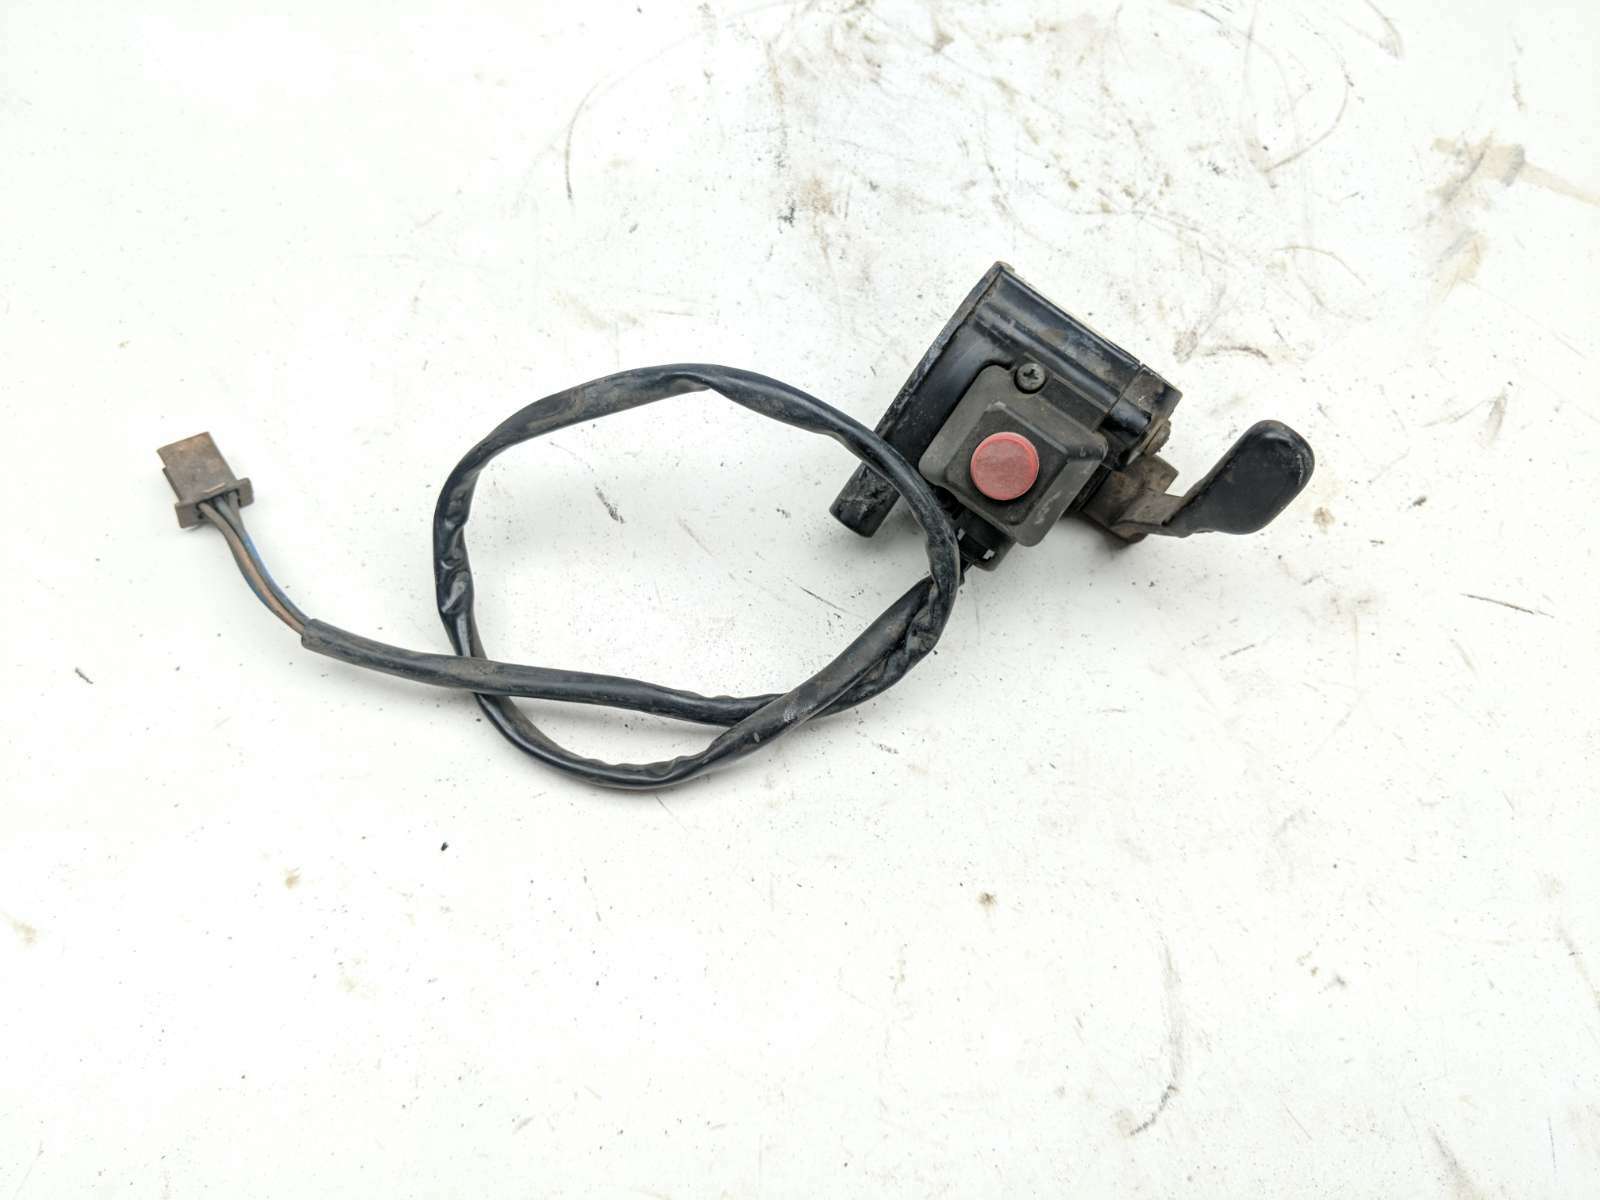 01 Yamaha Grizzly 600 Kill Switch Start Stop Thumb Throttle